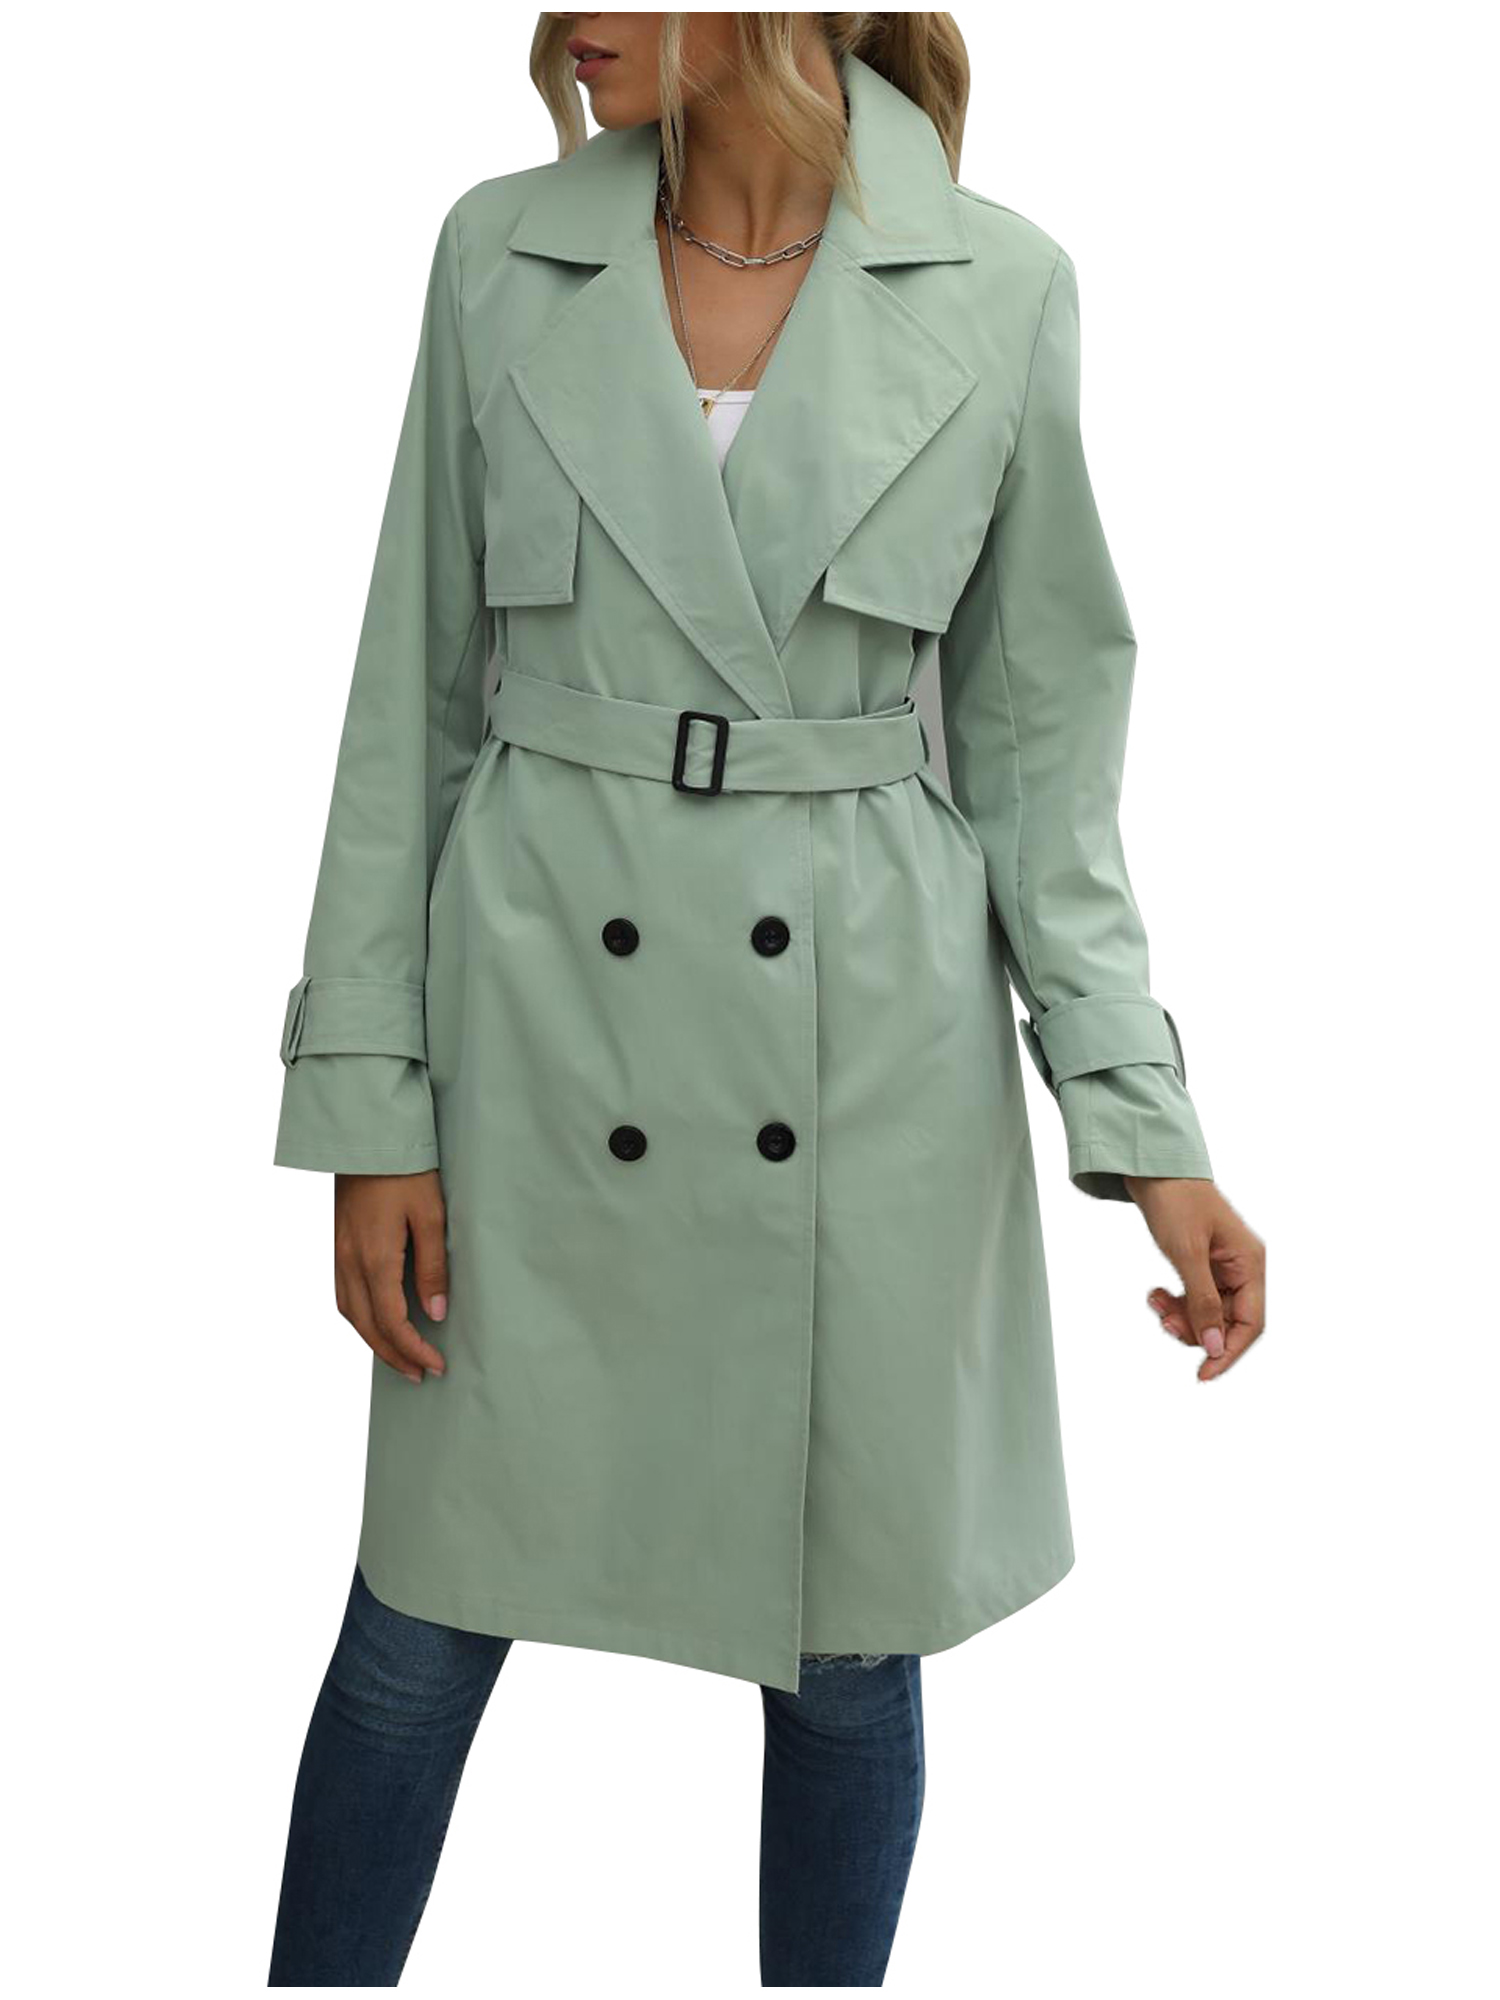 Spring hue Women Jacket Long Sleeve Lapel Double Breasted Belted Trench Coat - image 4 of 6